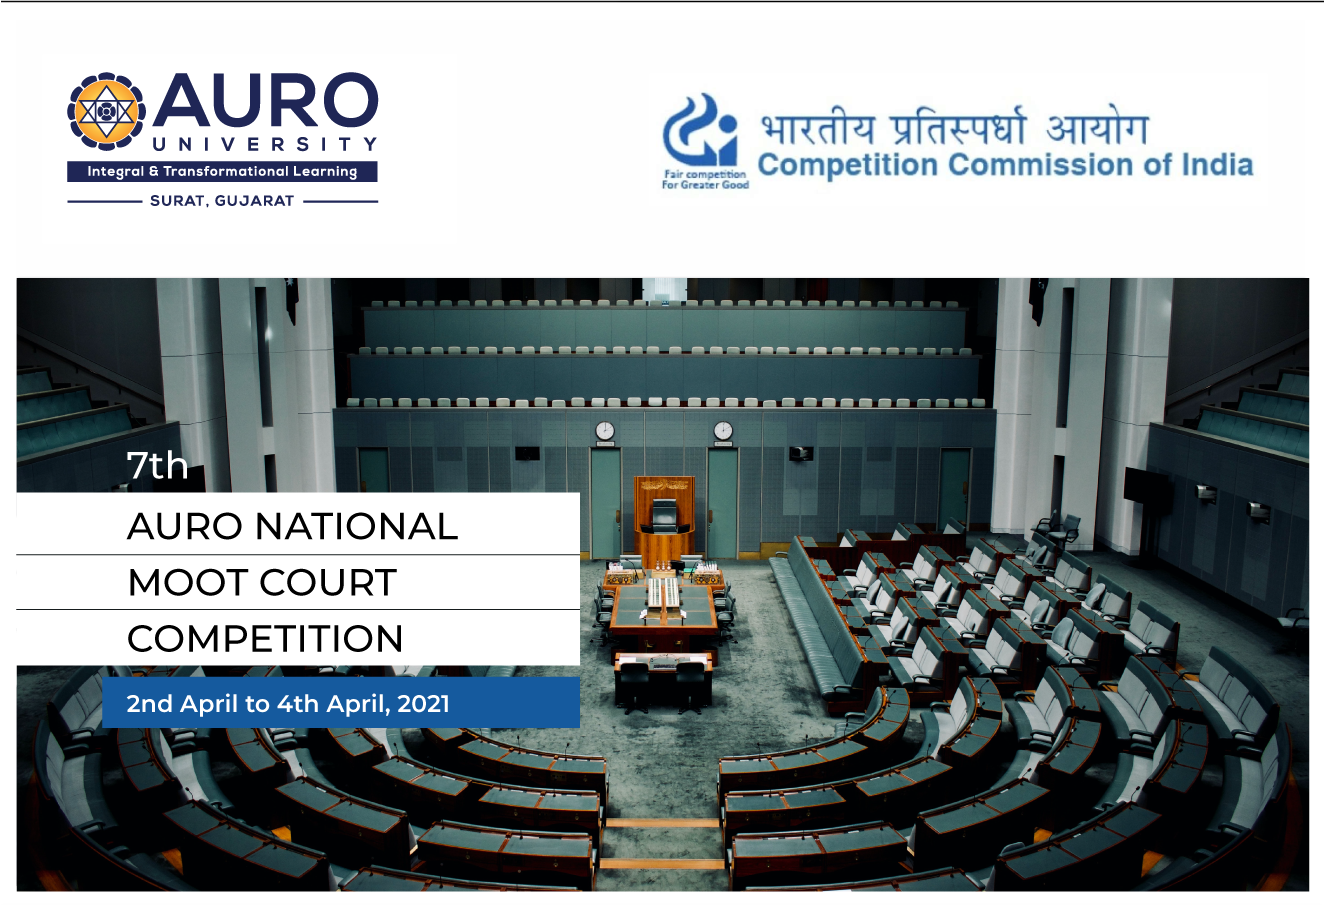 AURO University Hosted Its Seventh Edition Of The National Moot Court Competition From 2nd To 4th April 2021